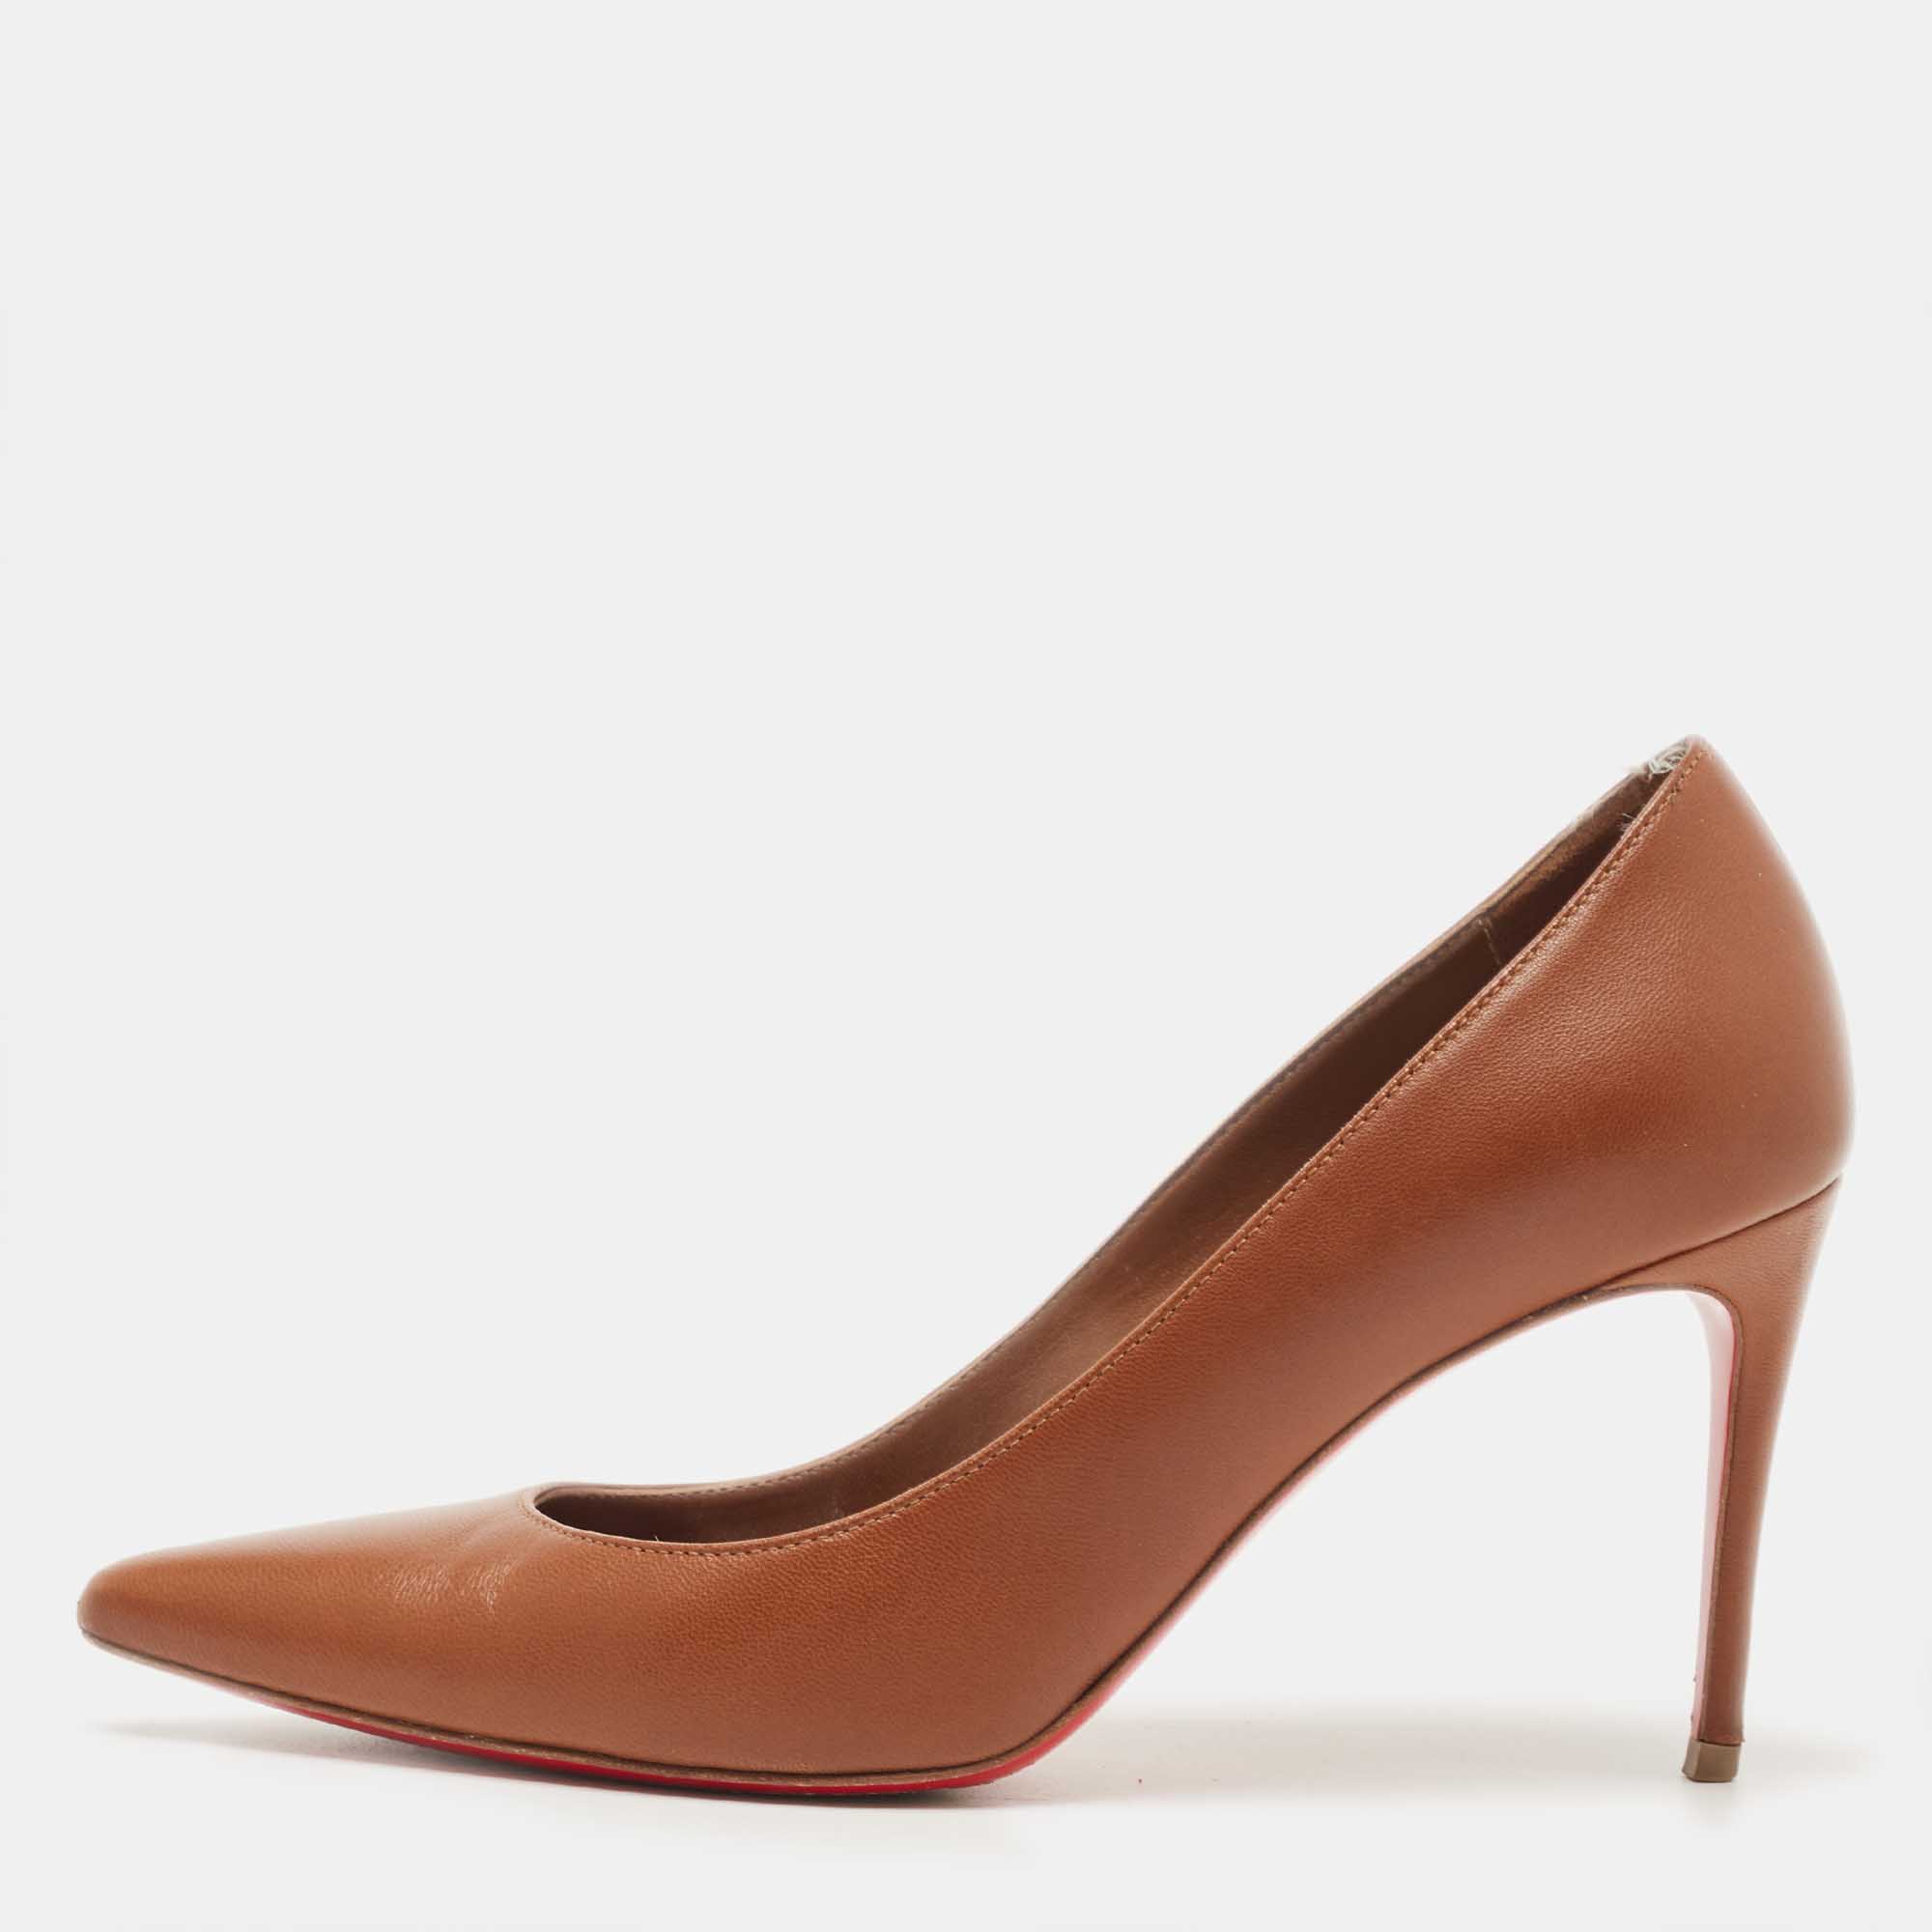 Christian louboutin brown leather kate pumps size 36